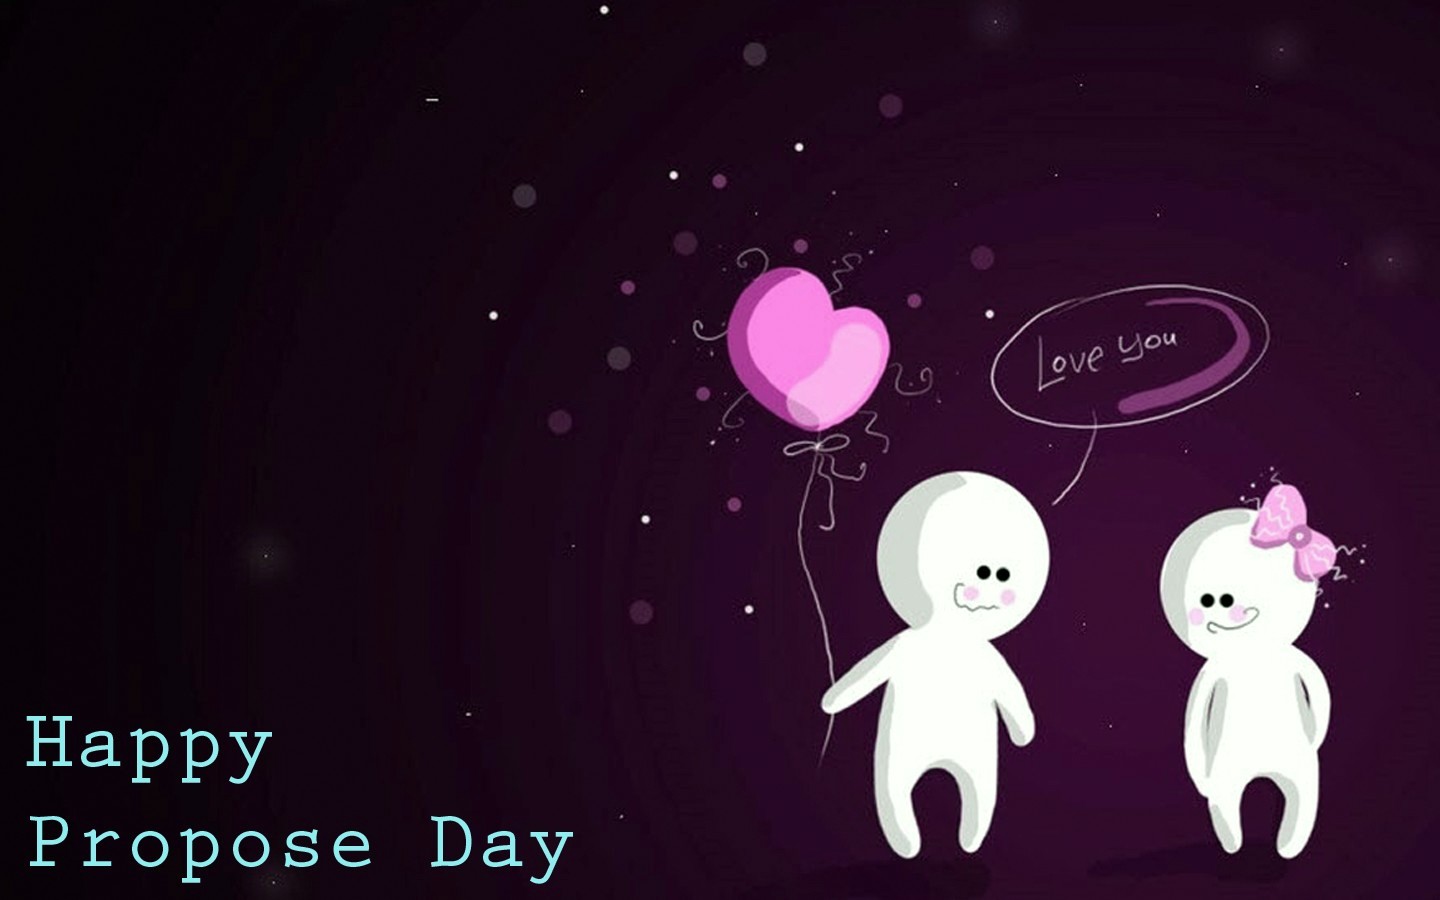 Happy Propose Day 2023 Wishes for Loved Ones